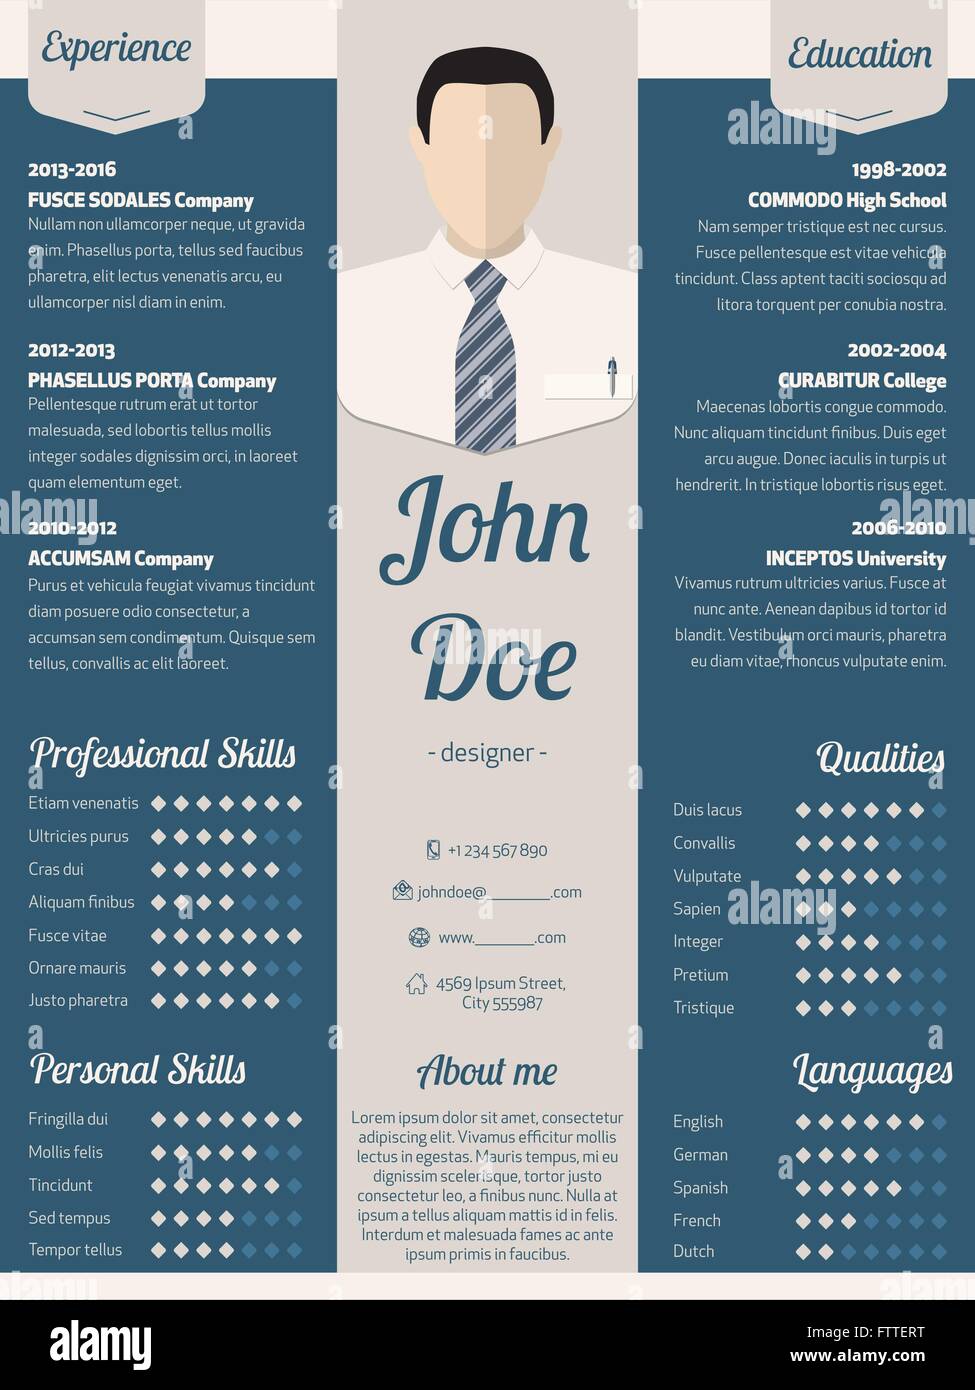 New Modern Resume Cv Curriculum Vitae Template Design In Blue With